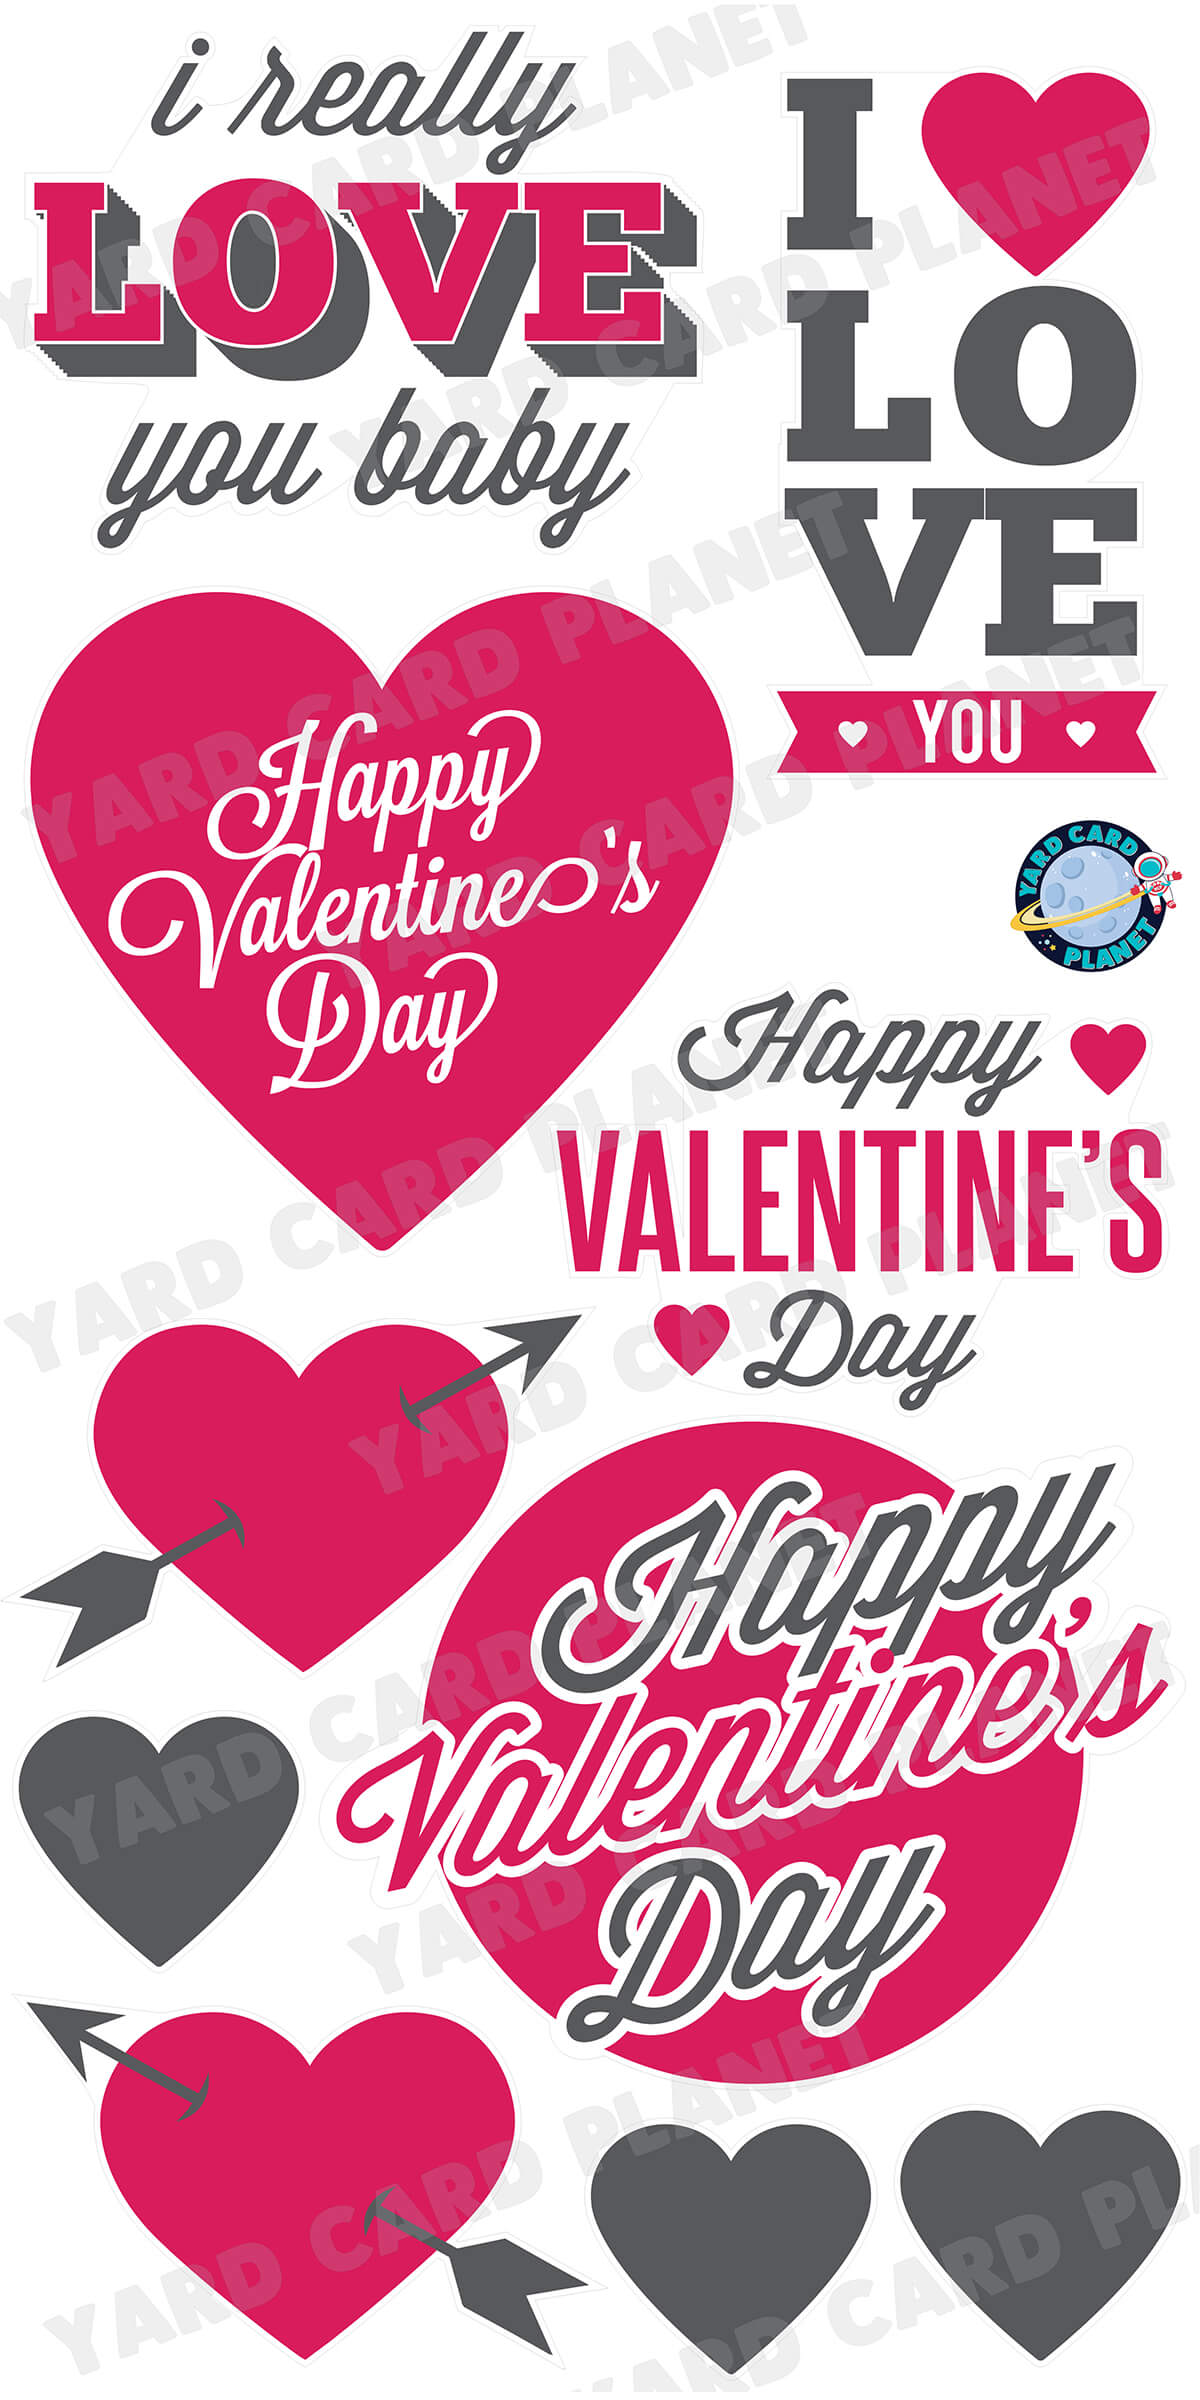 Happy Valentine's Day I Love You Signs and Yard Card Flair Set